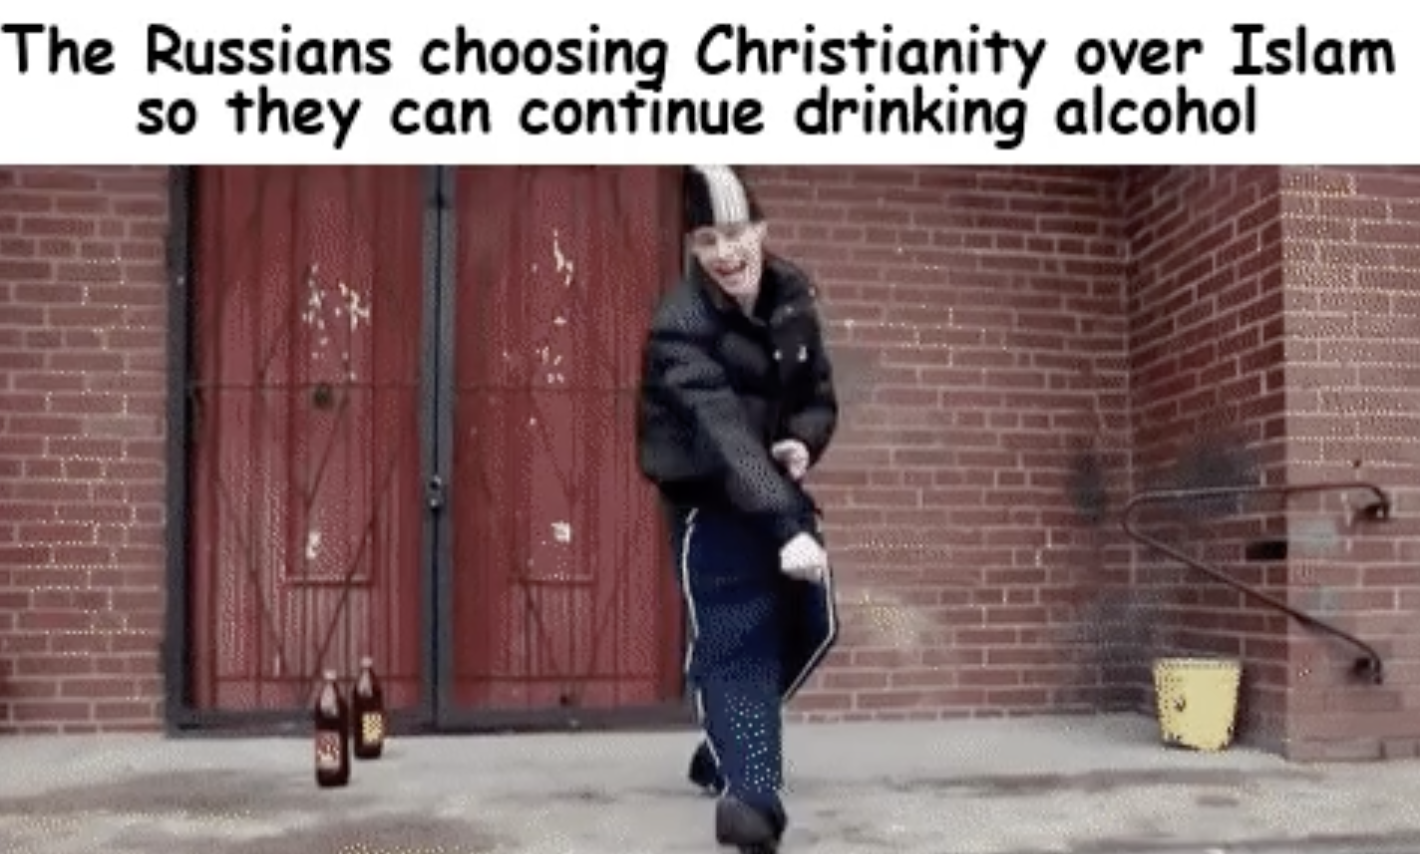 photo caption - The Russians choosing Christianity over Islam so they can continue drinking alcohol